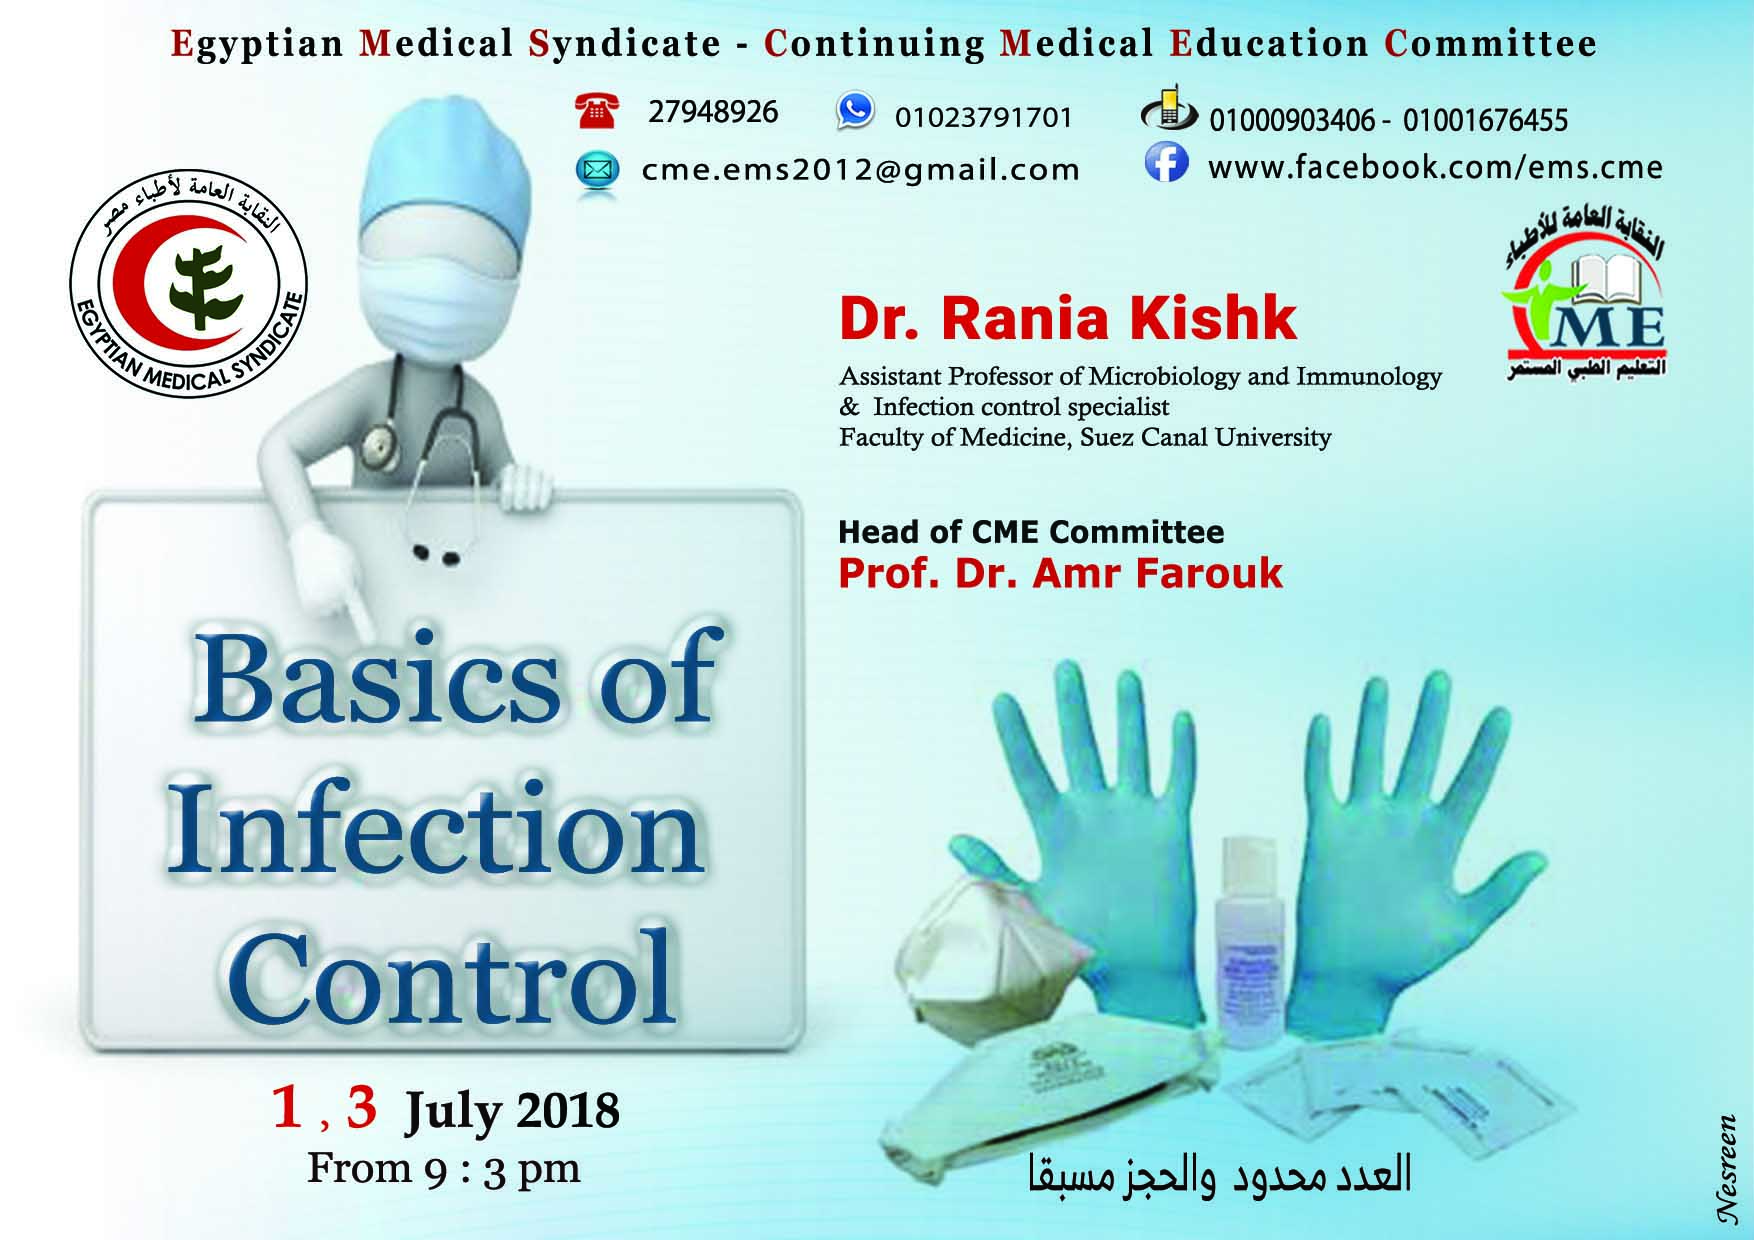 Basics of Infection Control